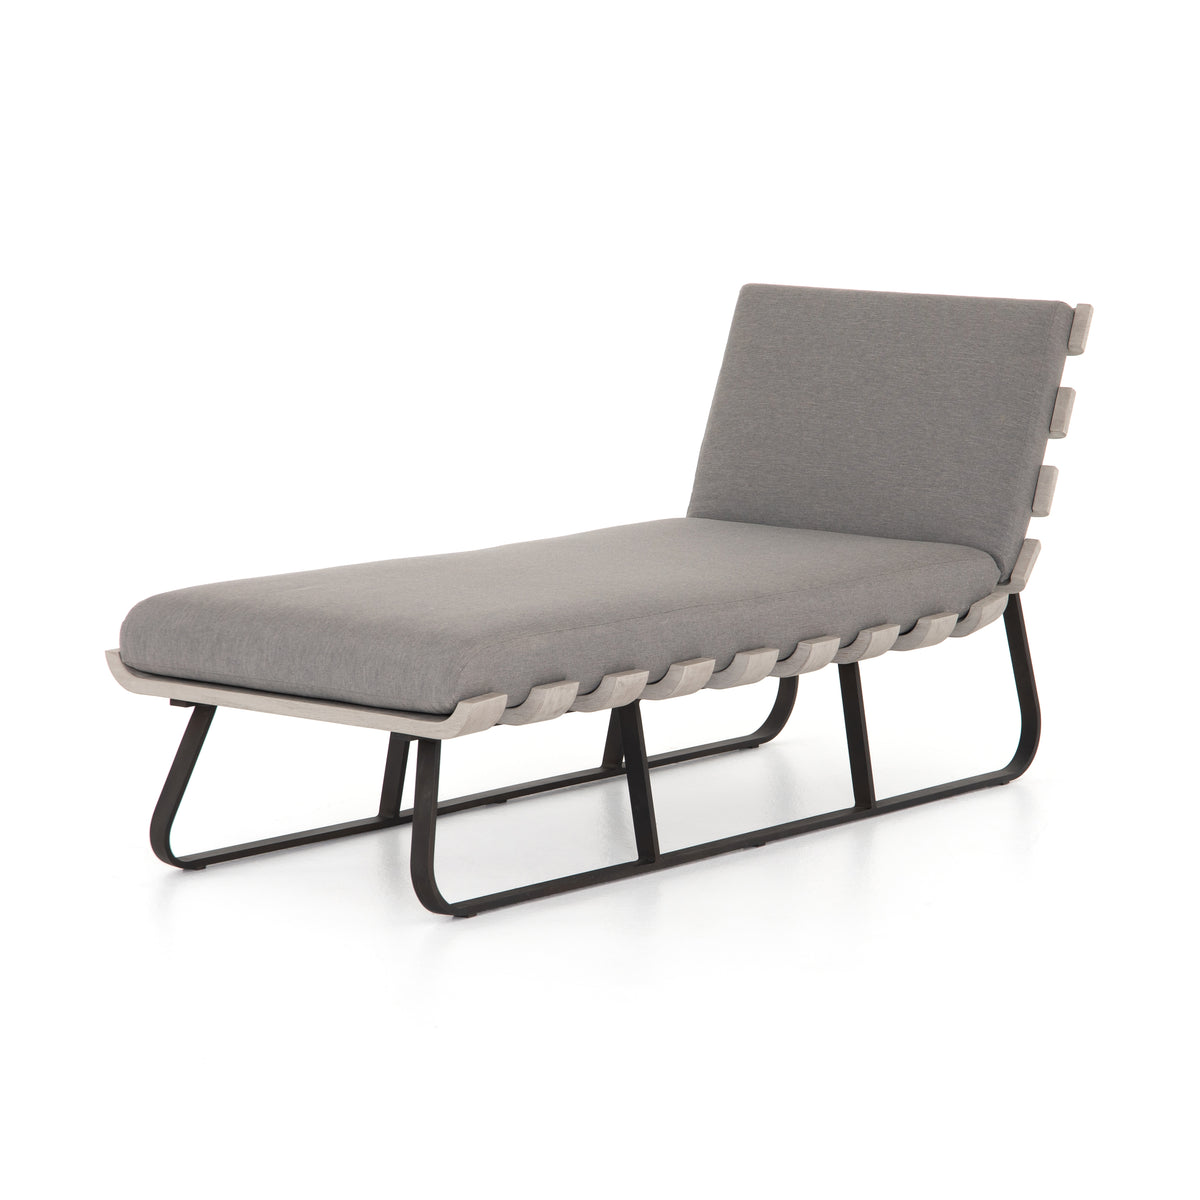 Darcy Outdoor Daybed - Charcoal